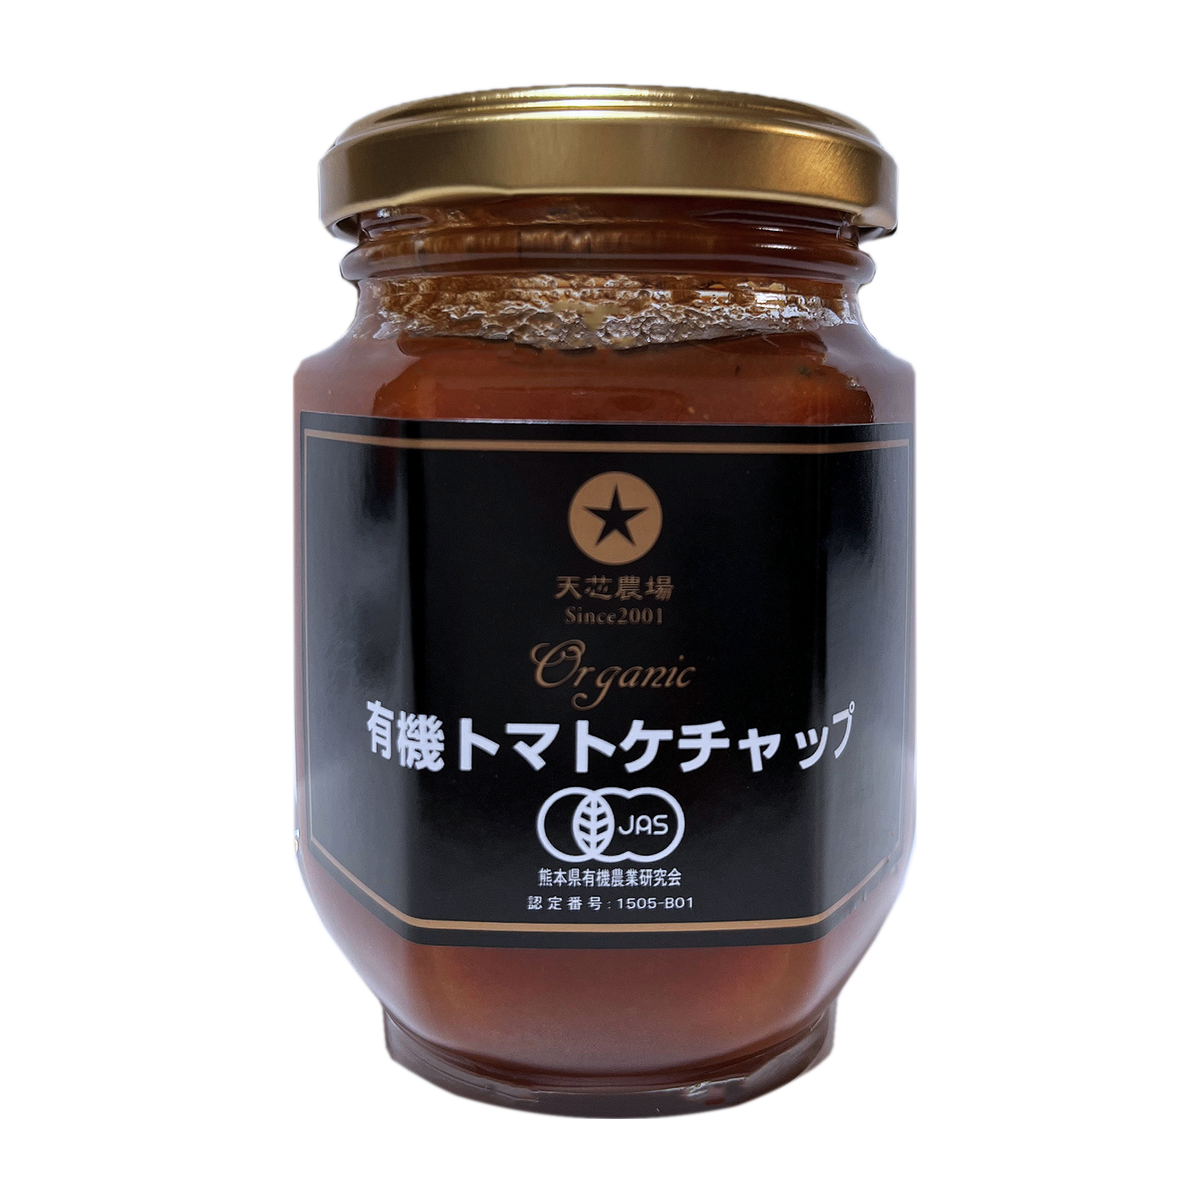 Certified Organic Additive-Free Tomato Ketchup from Japan (190g) - Horizon Farms